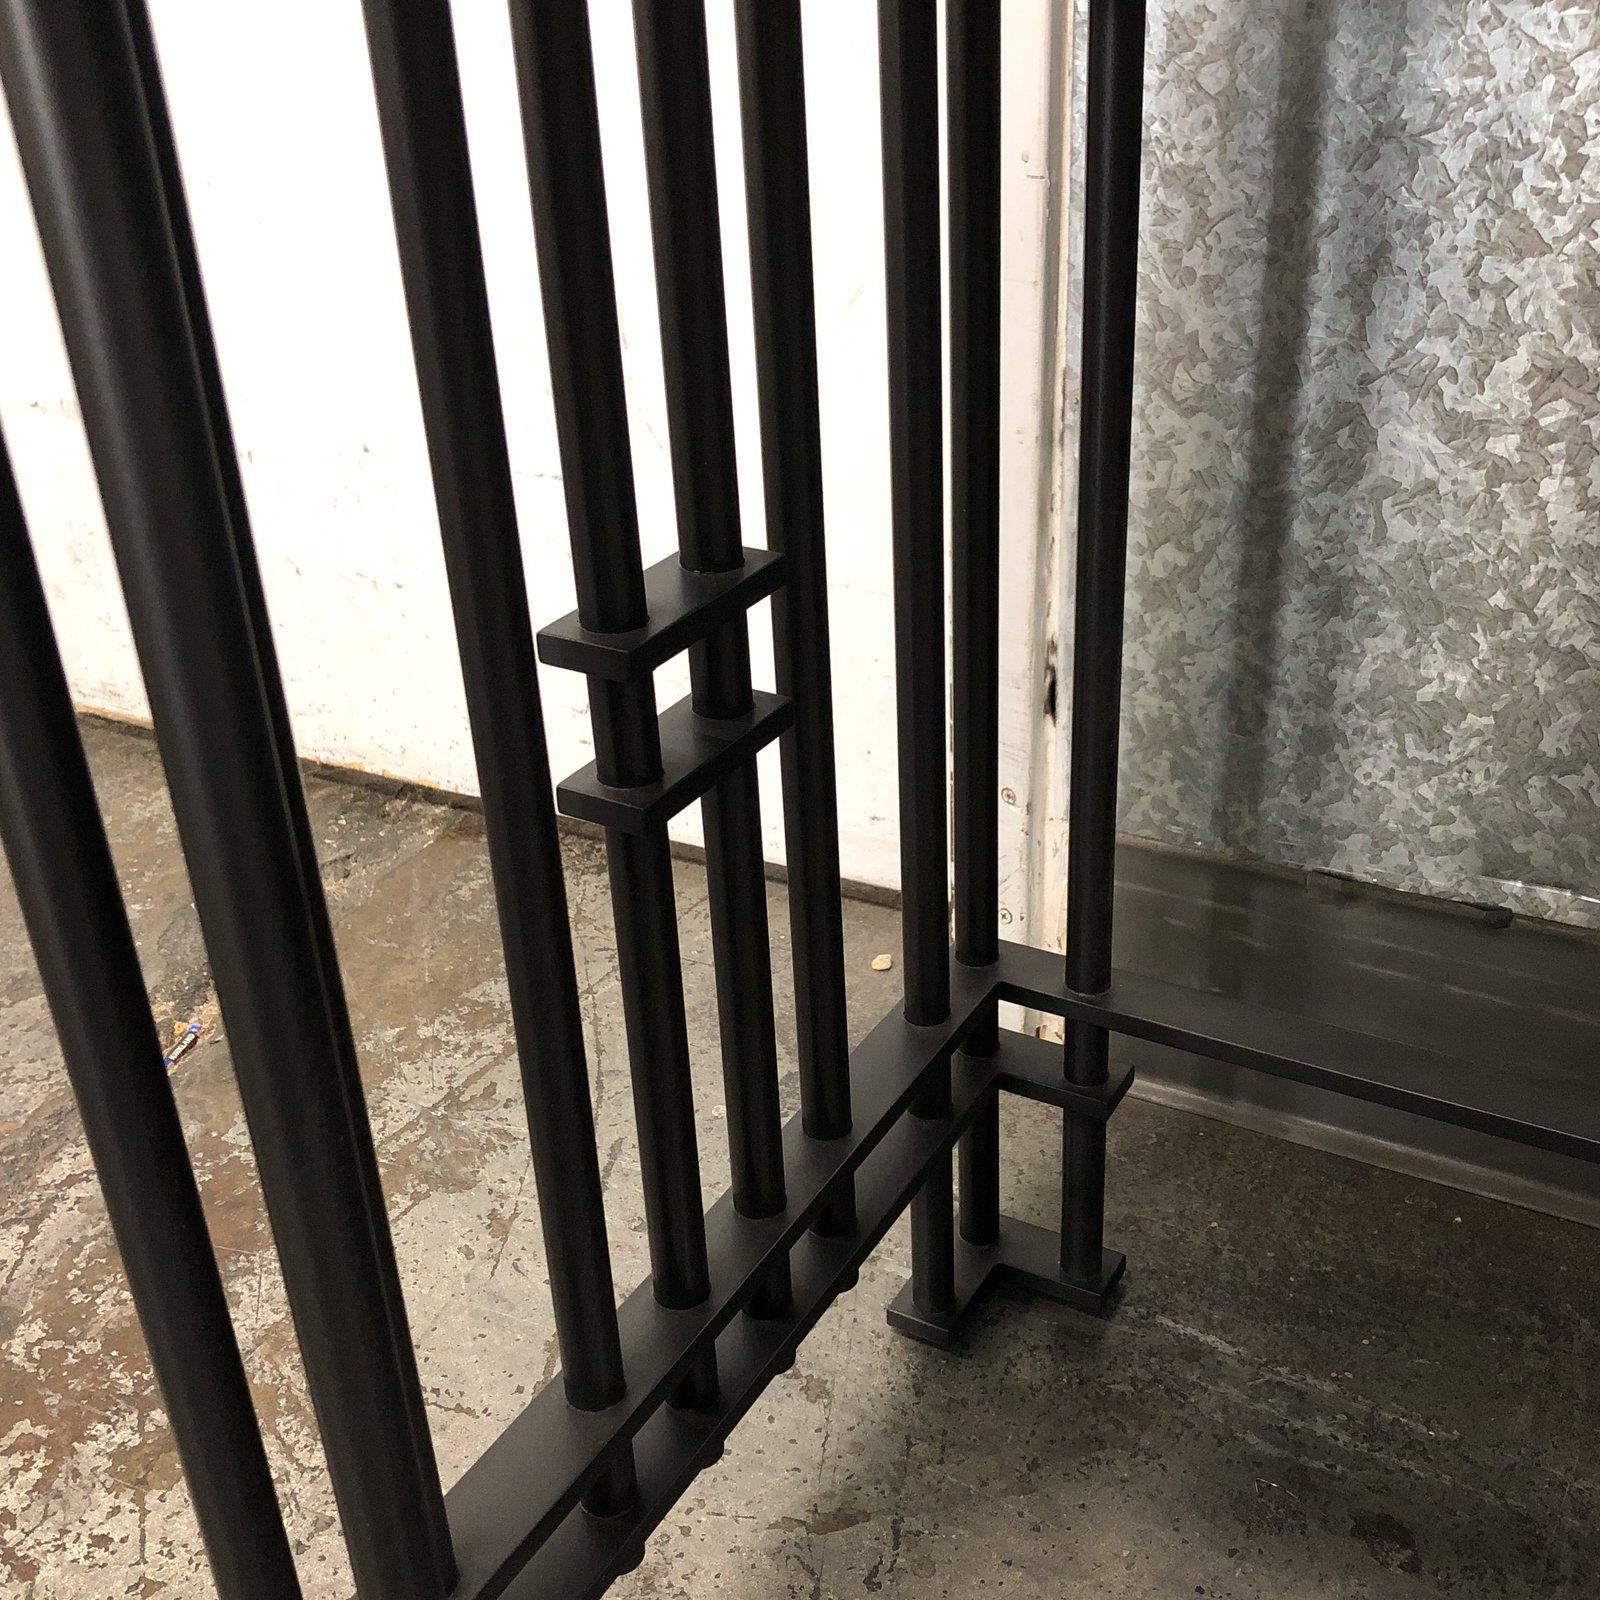 This is a custom black stone on black iron console table. Iron bars intersect in latticework reminiscent of Art Deco styles, if not for the black on black color scheme, and solid, sharp edges echoed in the stone top. A formal, and exquisitely